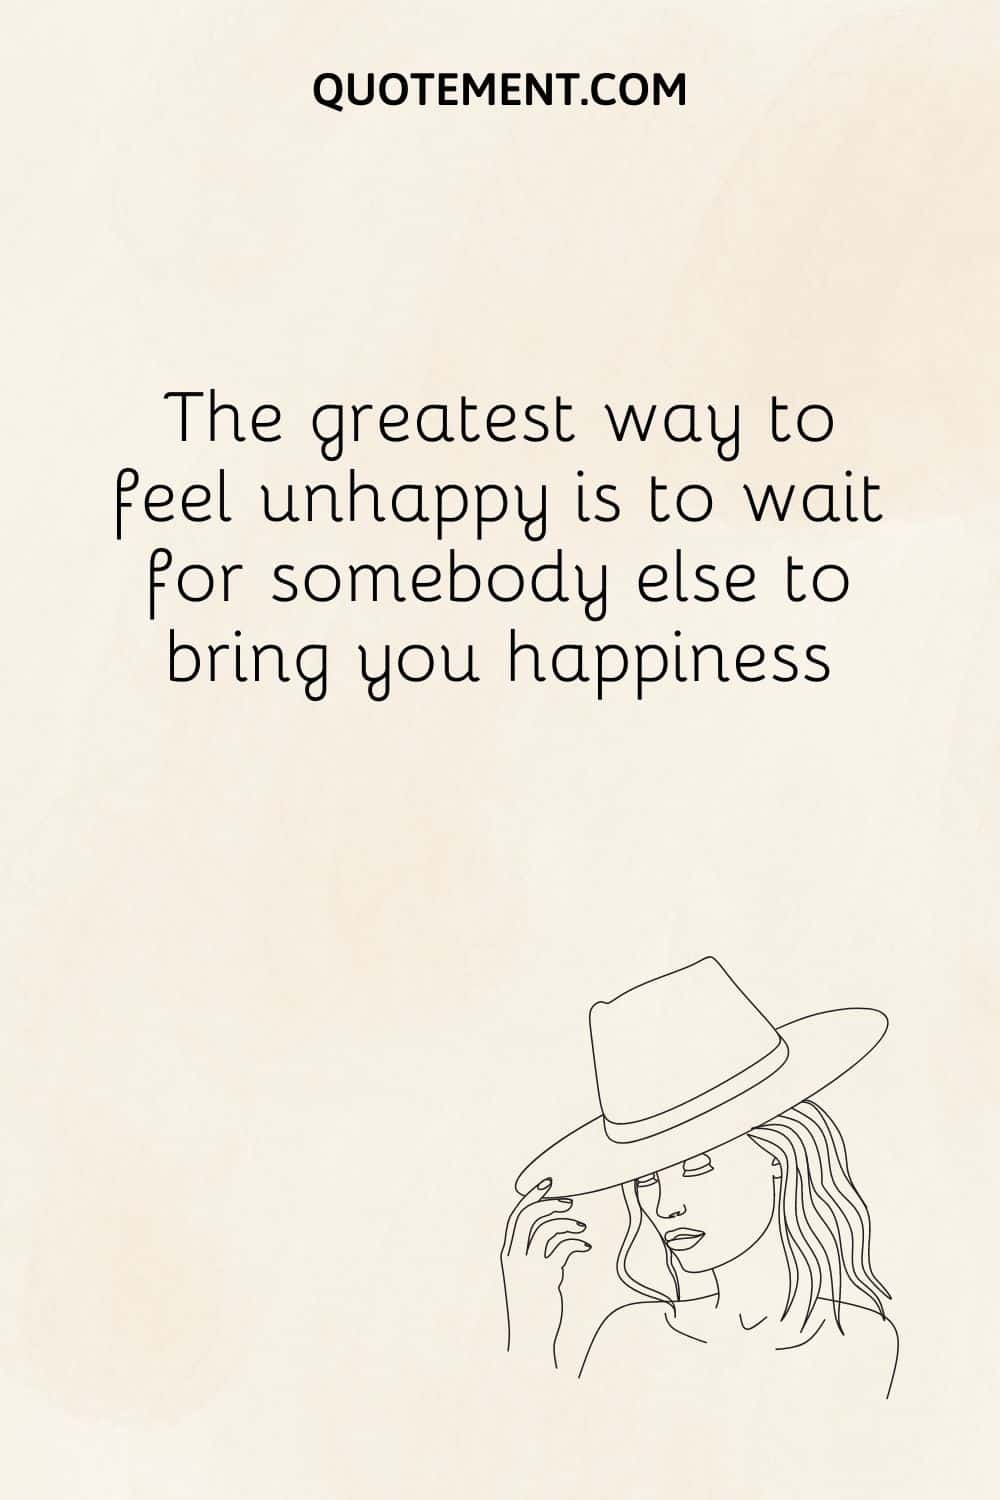 The greatest way to feel unhappy is to wait for somebody else to bring you happiness.